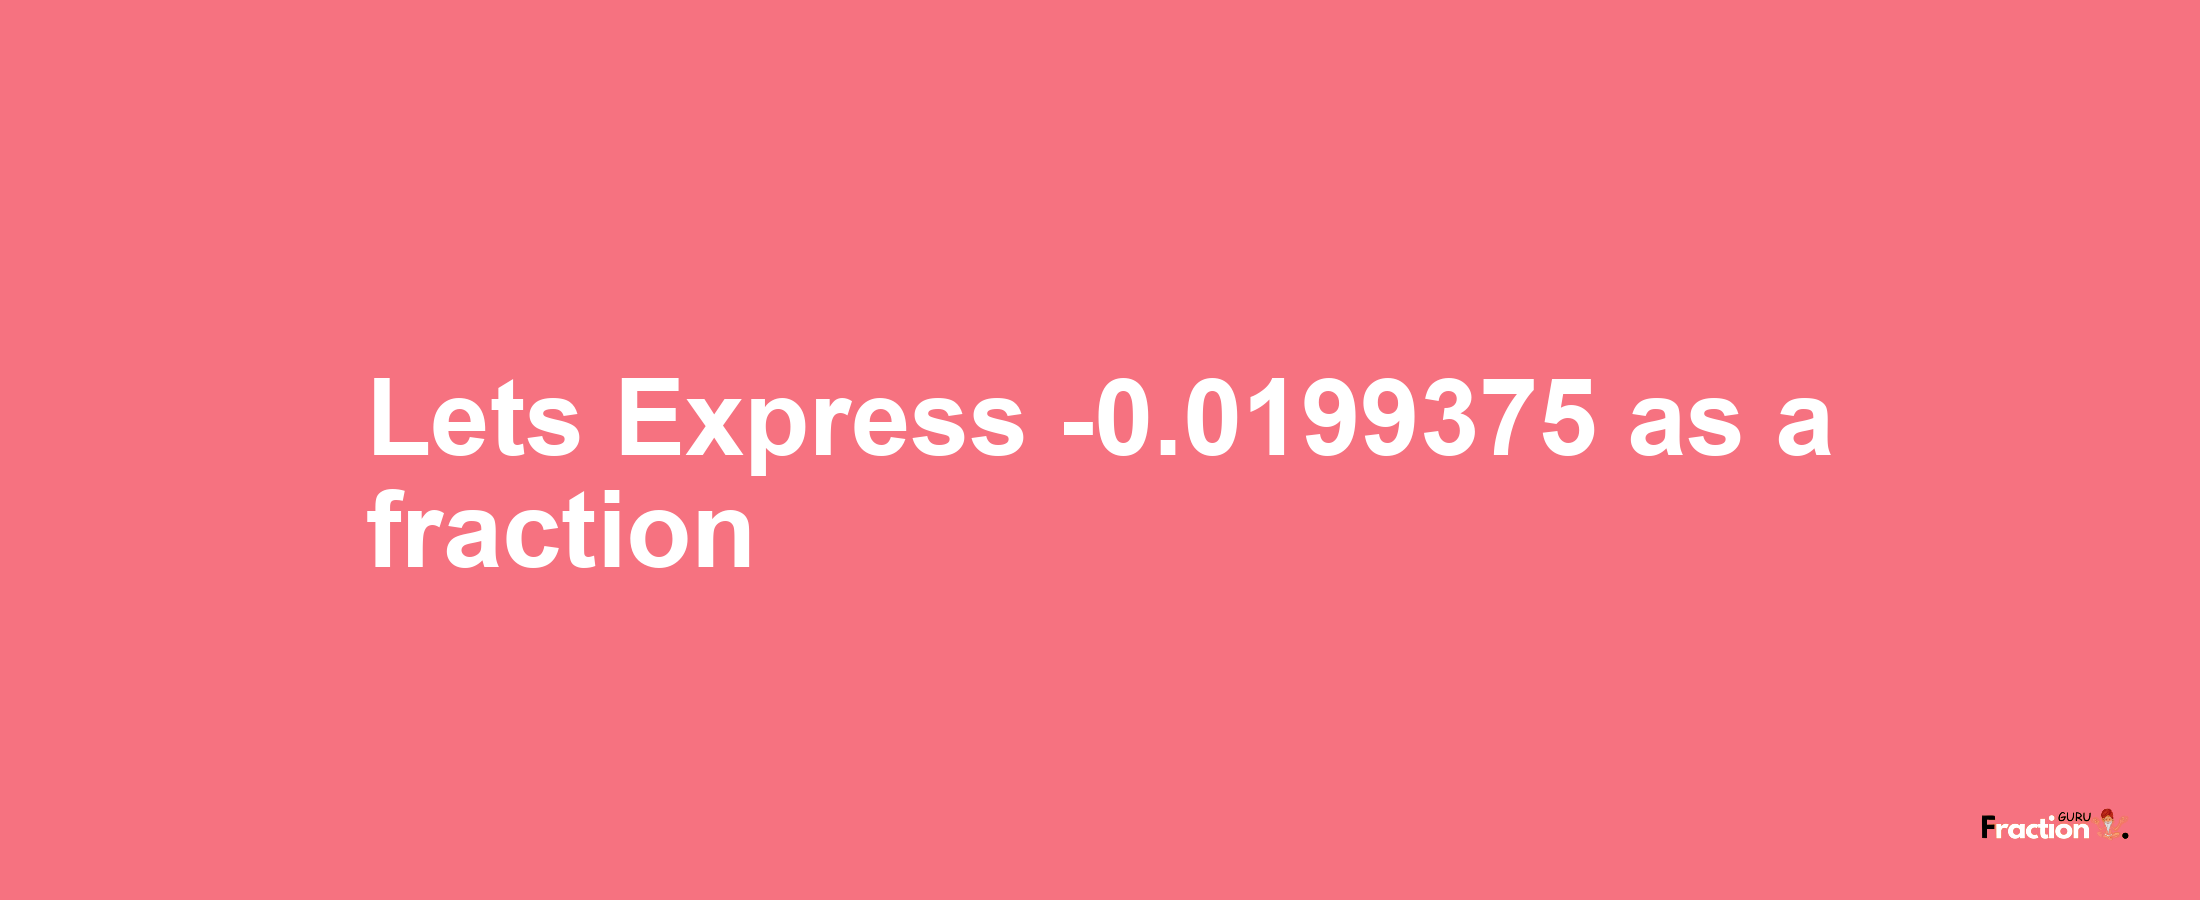 Lets Express -0.0199375 as afraction